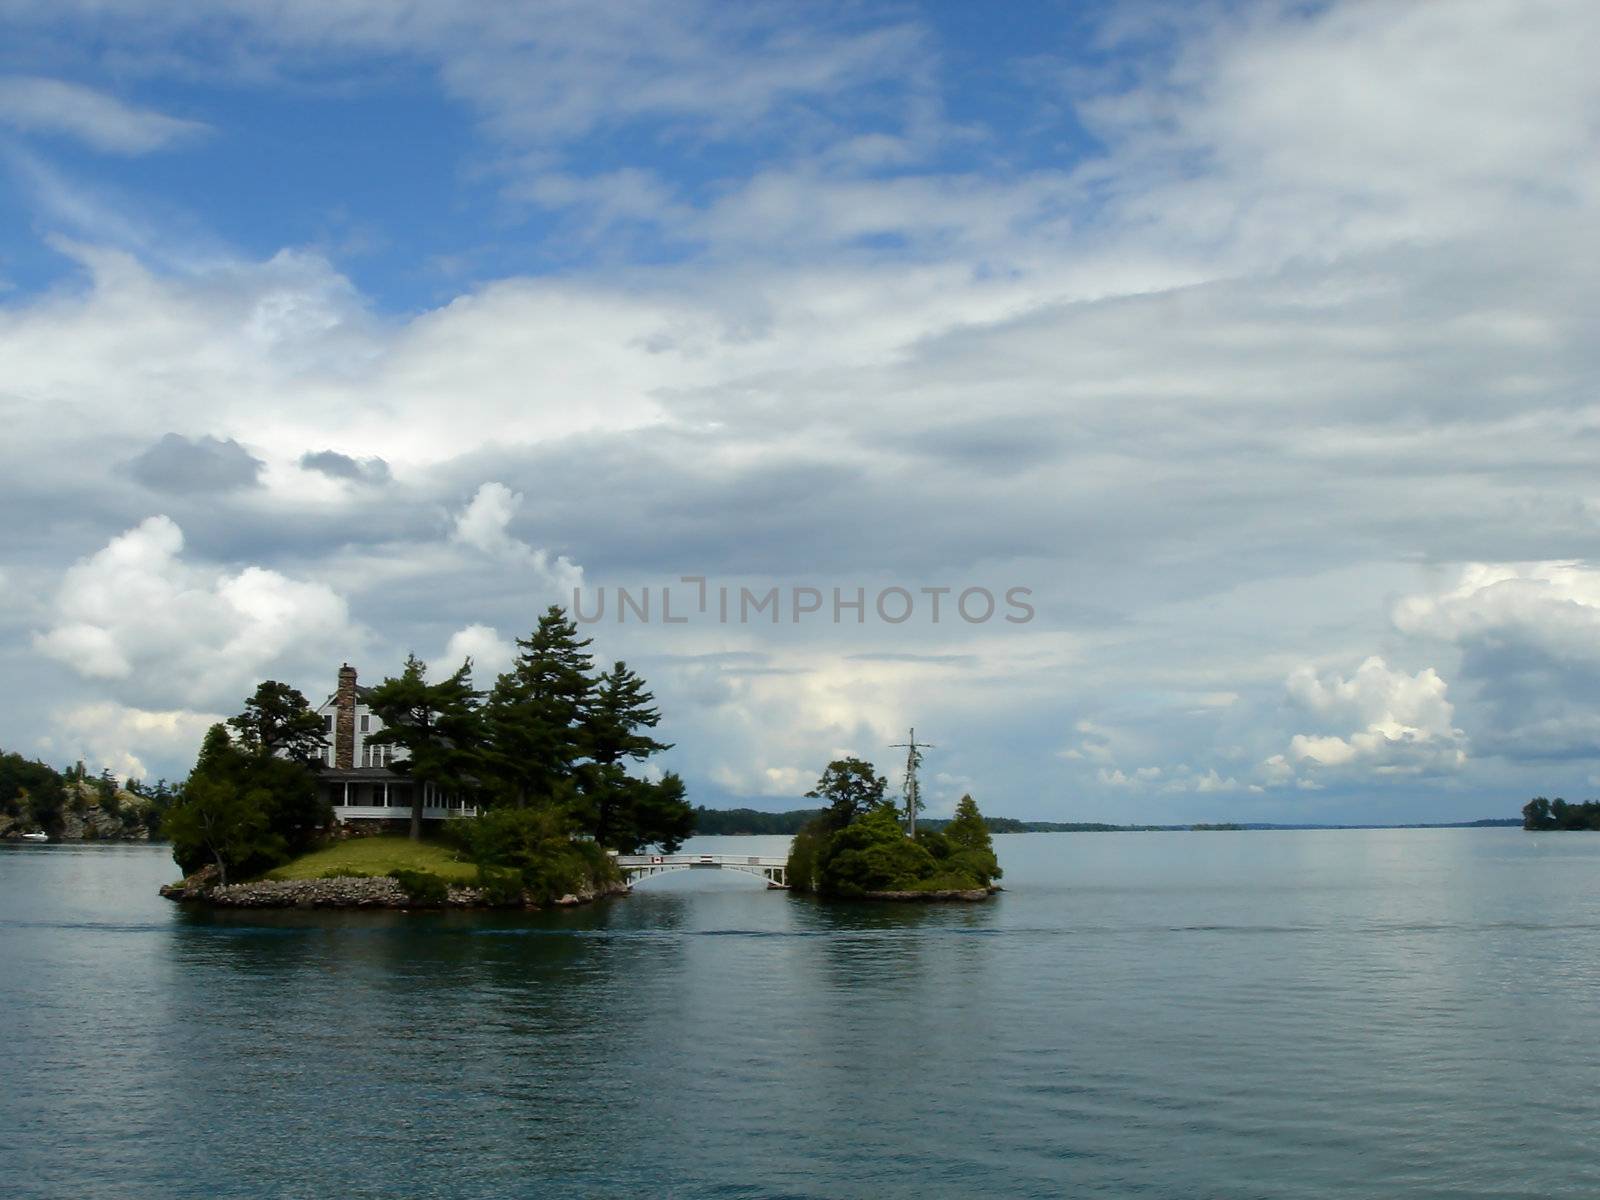 Islands and cross on thousand islands, Ontario lake, Canada by Elenaphotos21